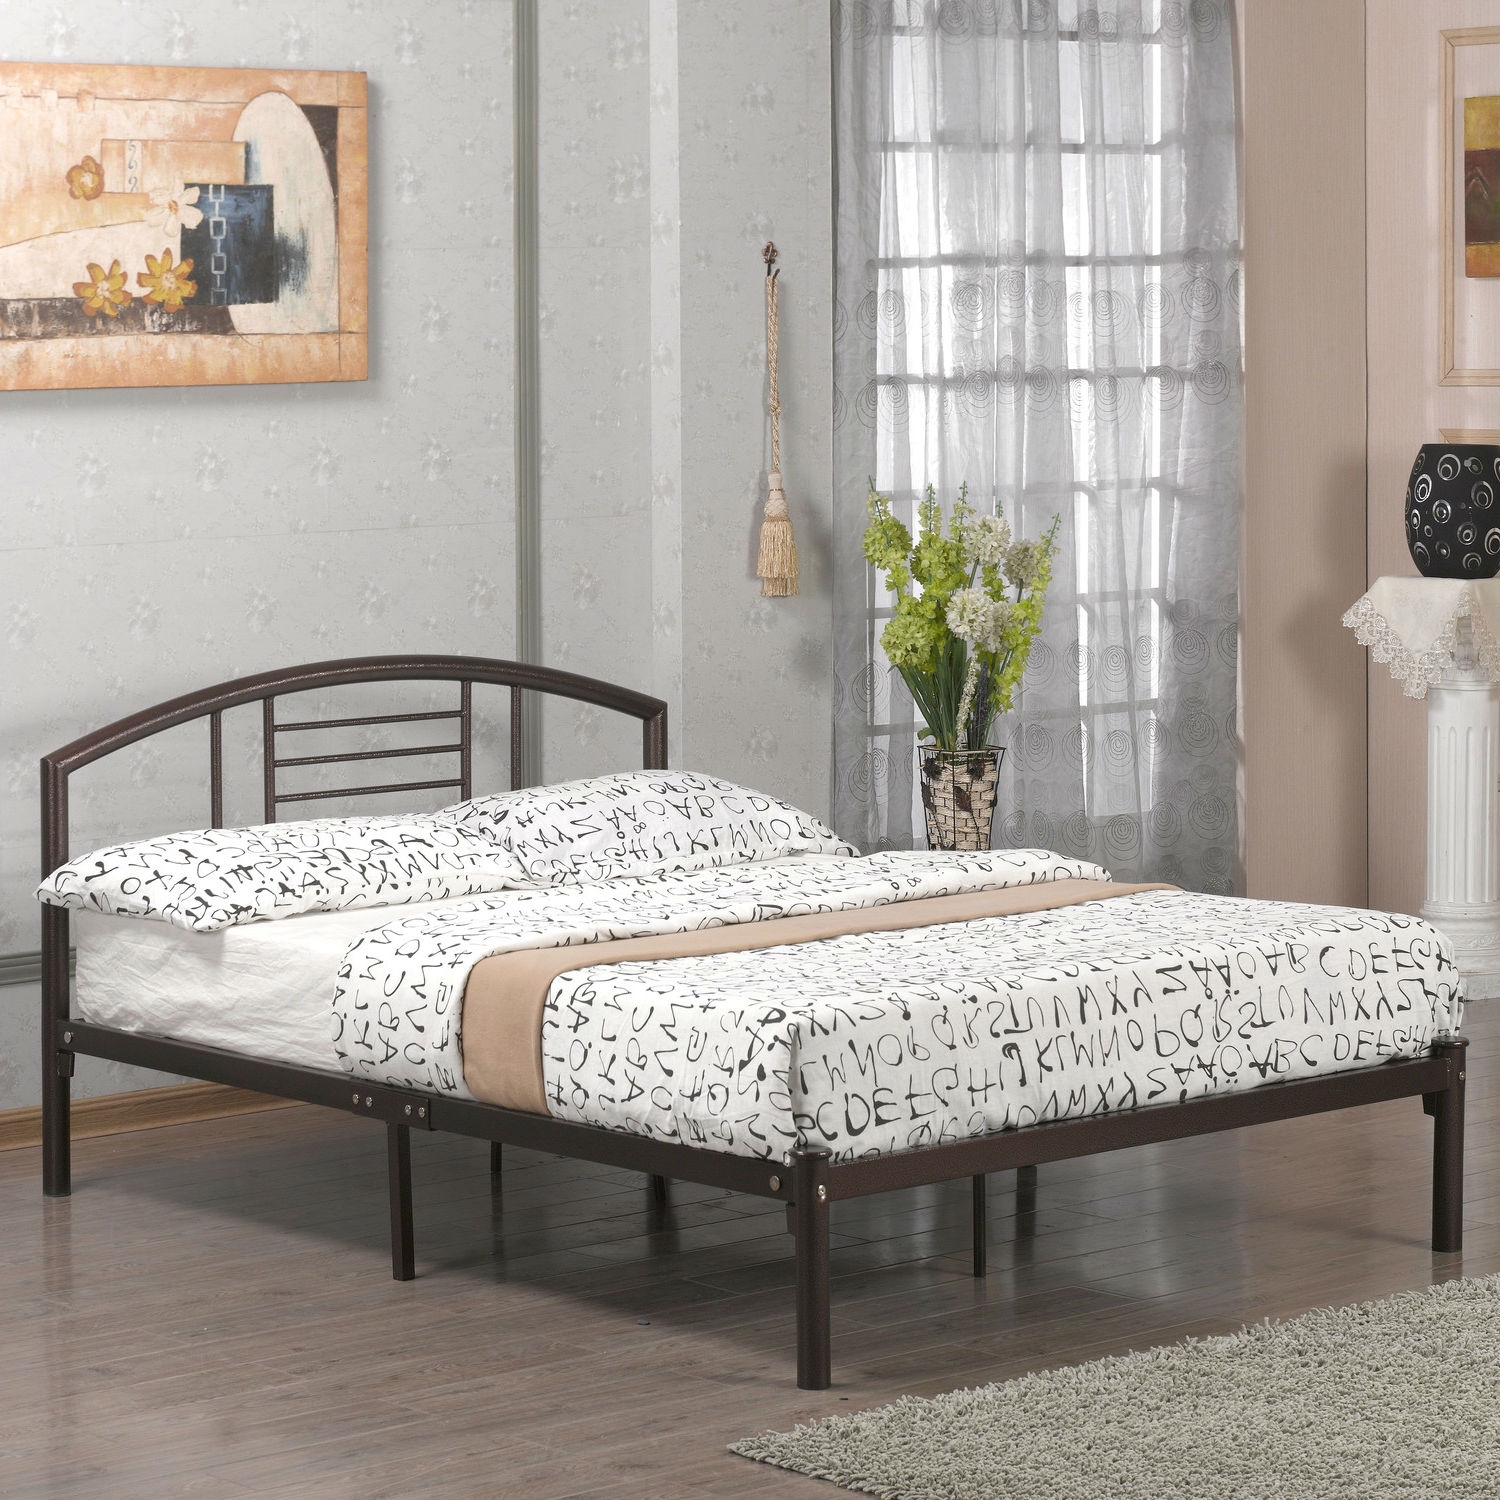 Twin size Metal Platform Bed Frame with Headboard in Bronze Finish